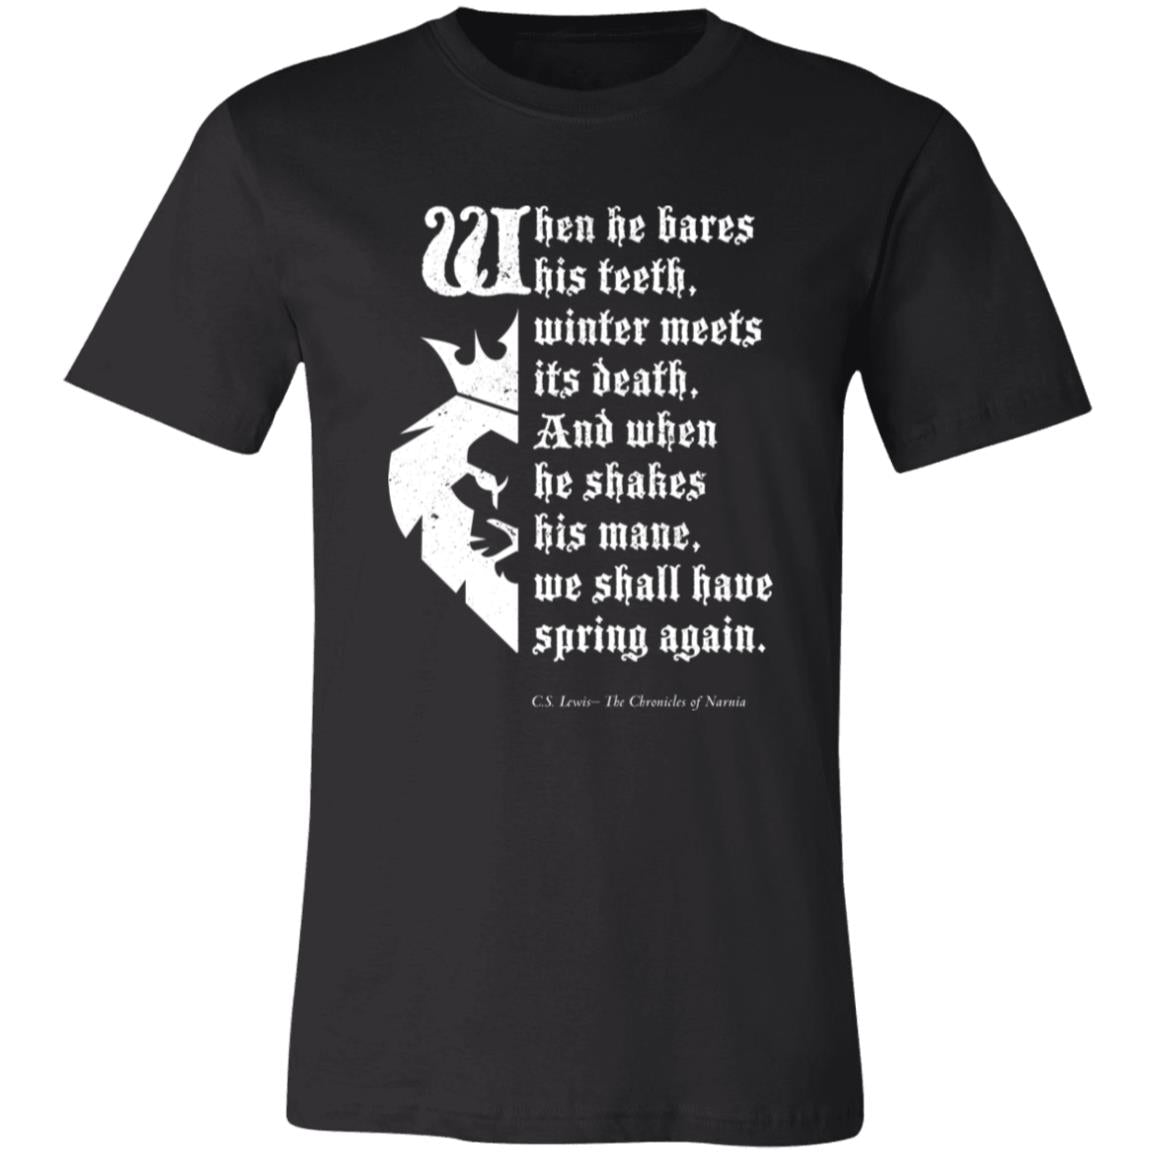 Narnia Aslan Quote Unisex Jersey Short-Sleeve T-Shirt for fans of Narnia and Aslan-T-Shirts-PureDesignTees